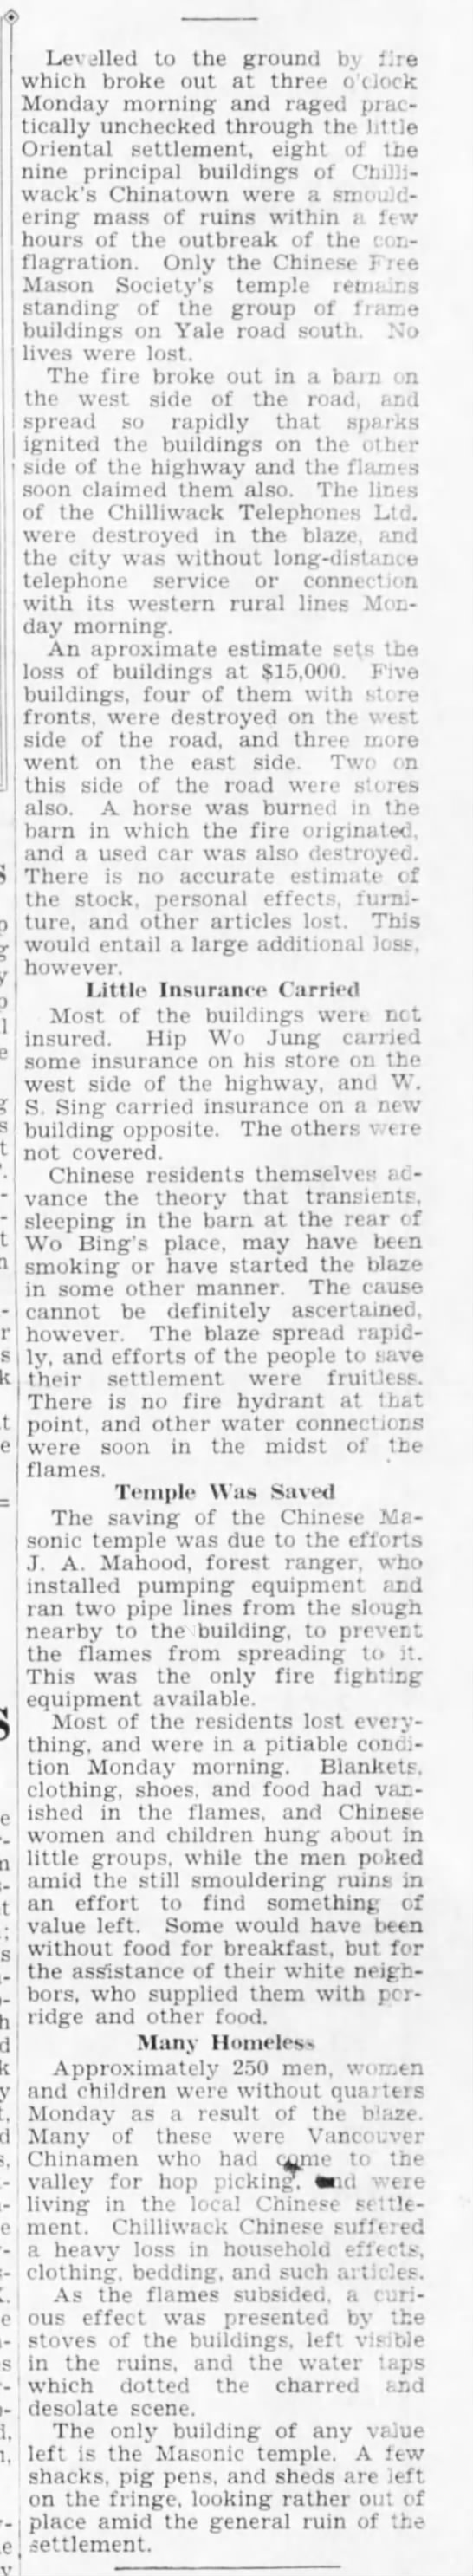 A newspaper clipping from the Chilliwack Progress outlining the 1934 Chinatown fire